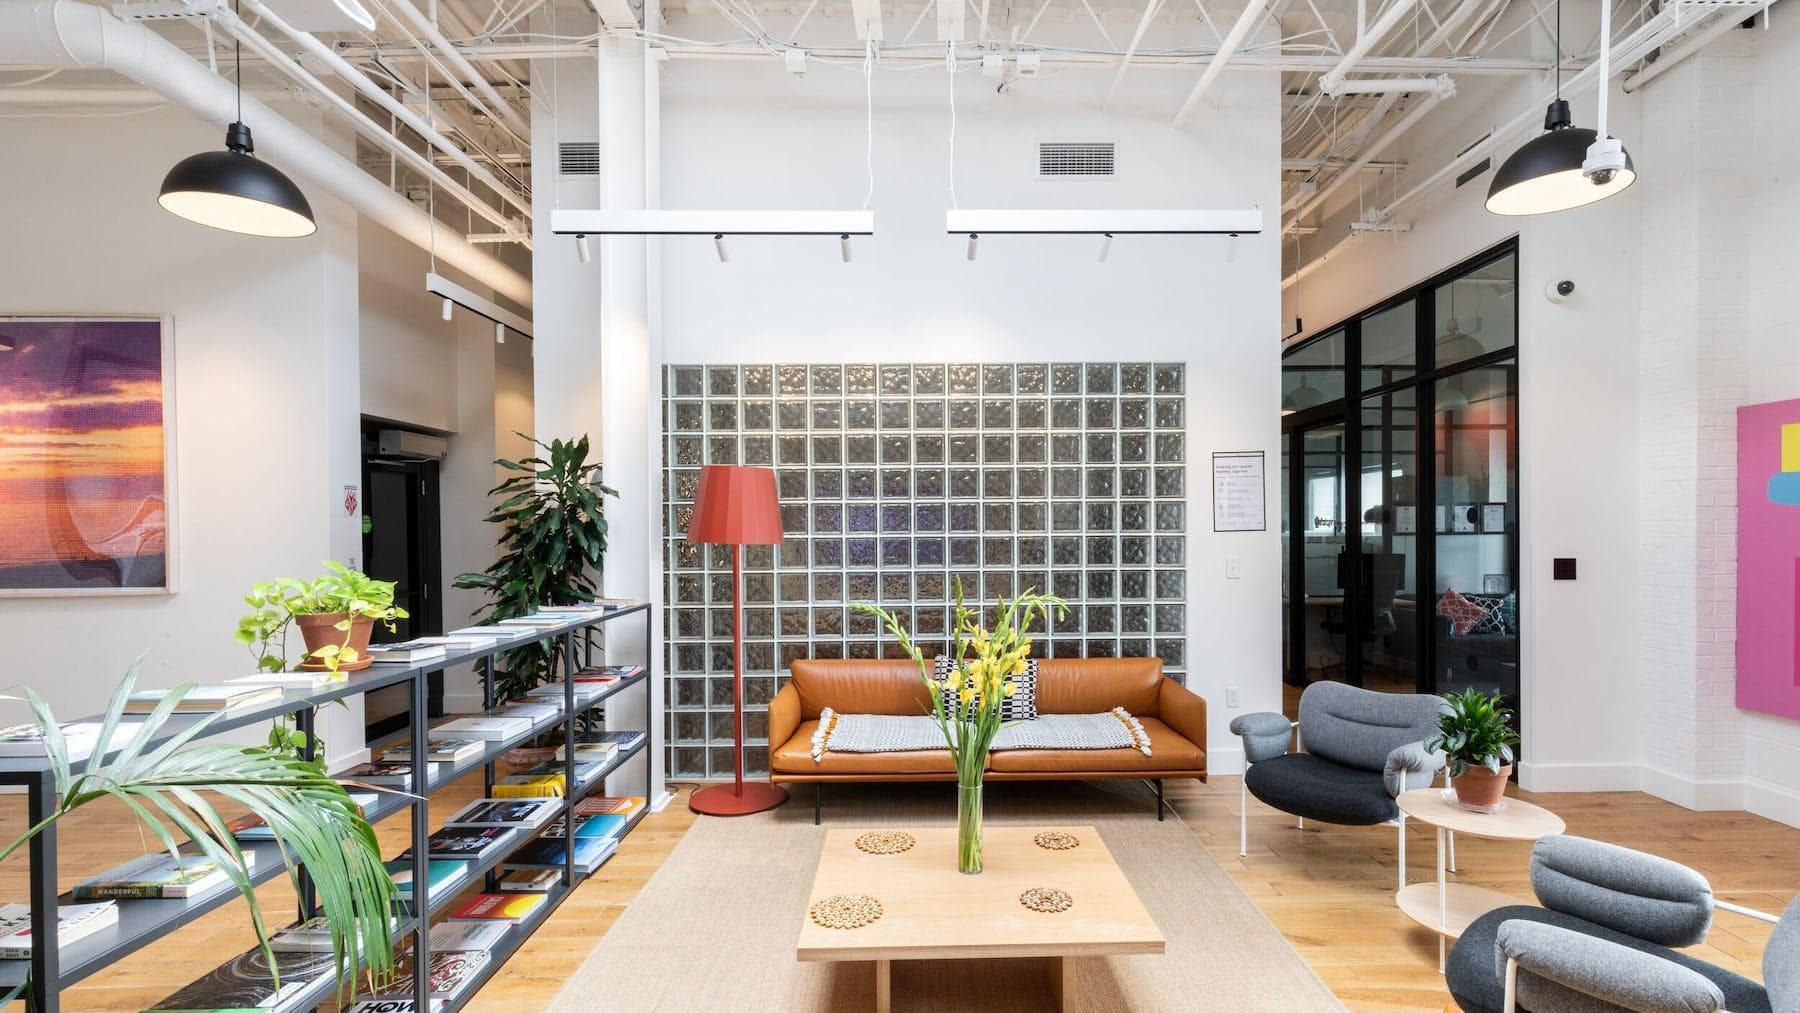 Common Area in the WeWork at College park with couches, modern style reading chairs, and open shelves of books, magazines, and other publications. Green office plants also decorate the space